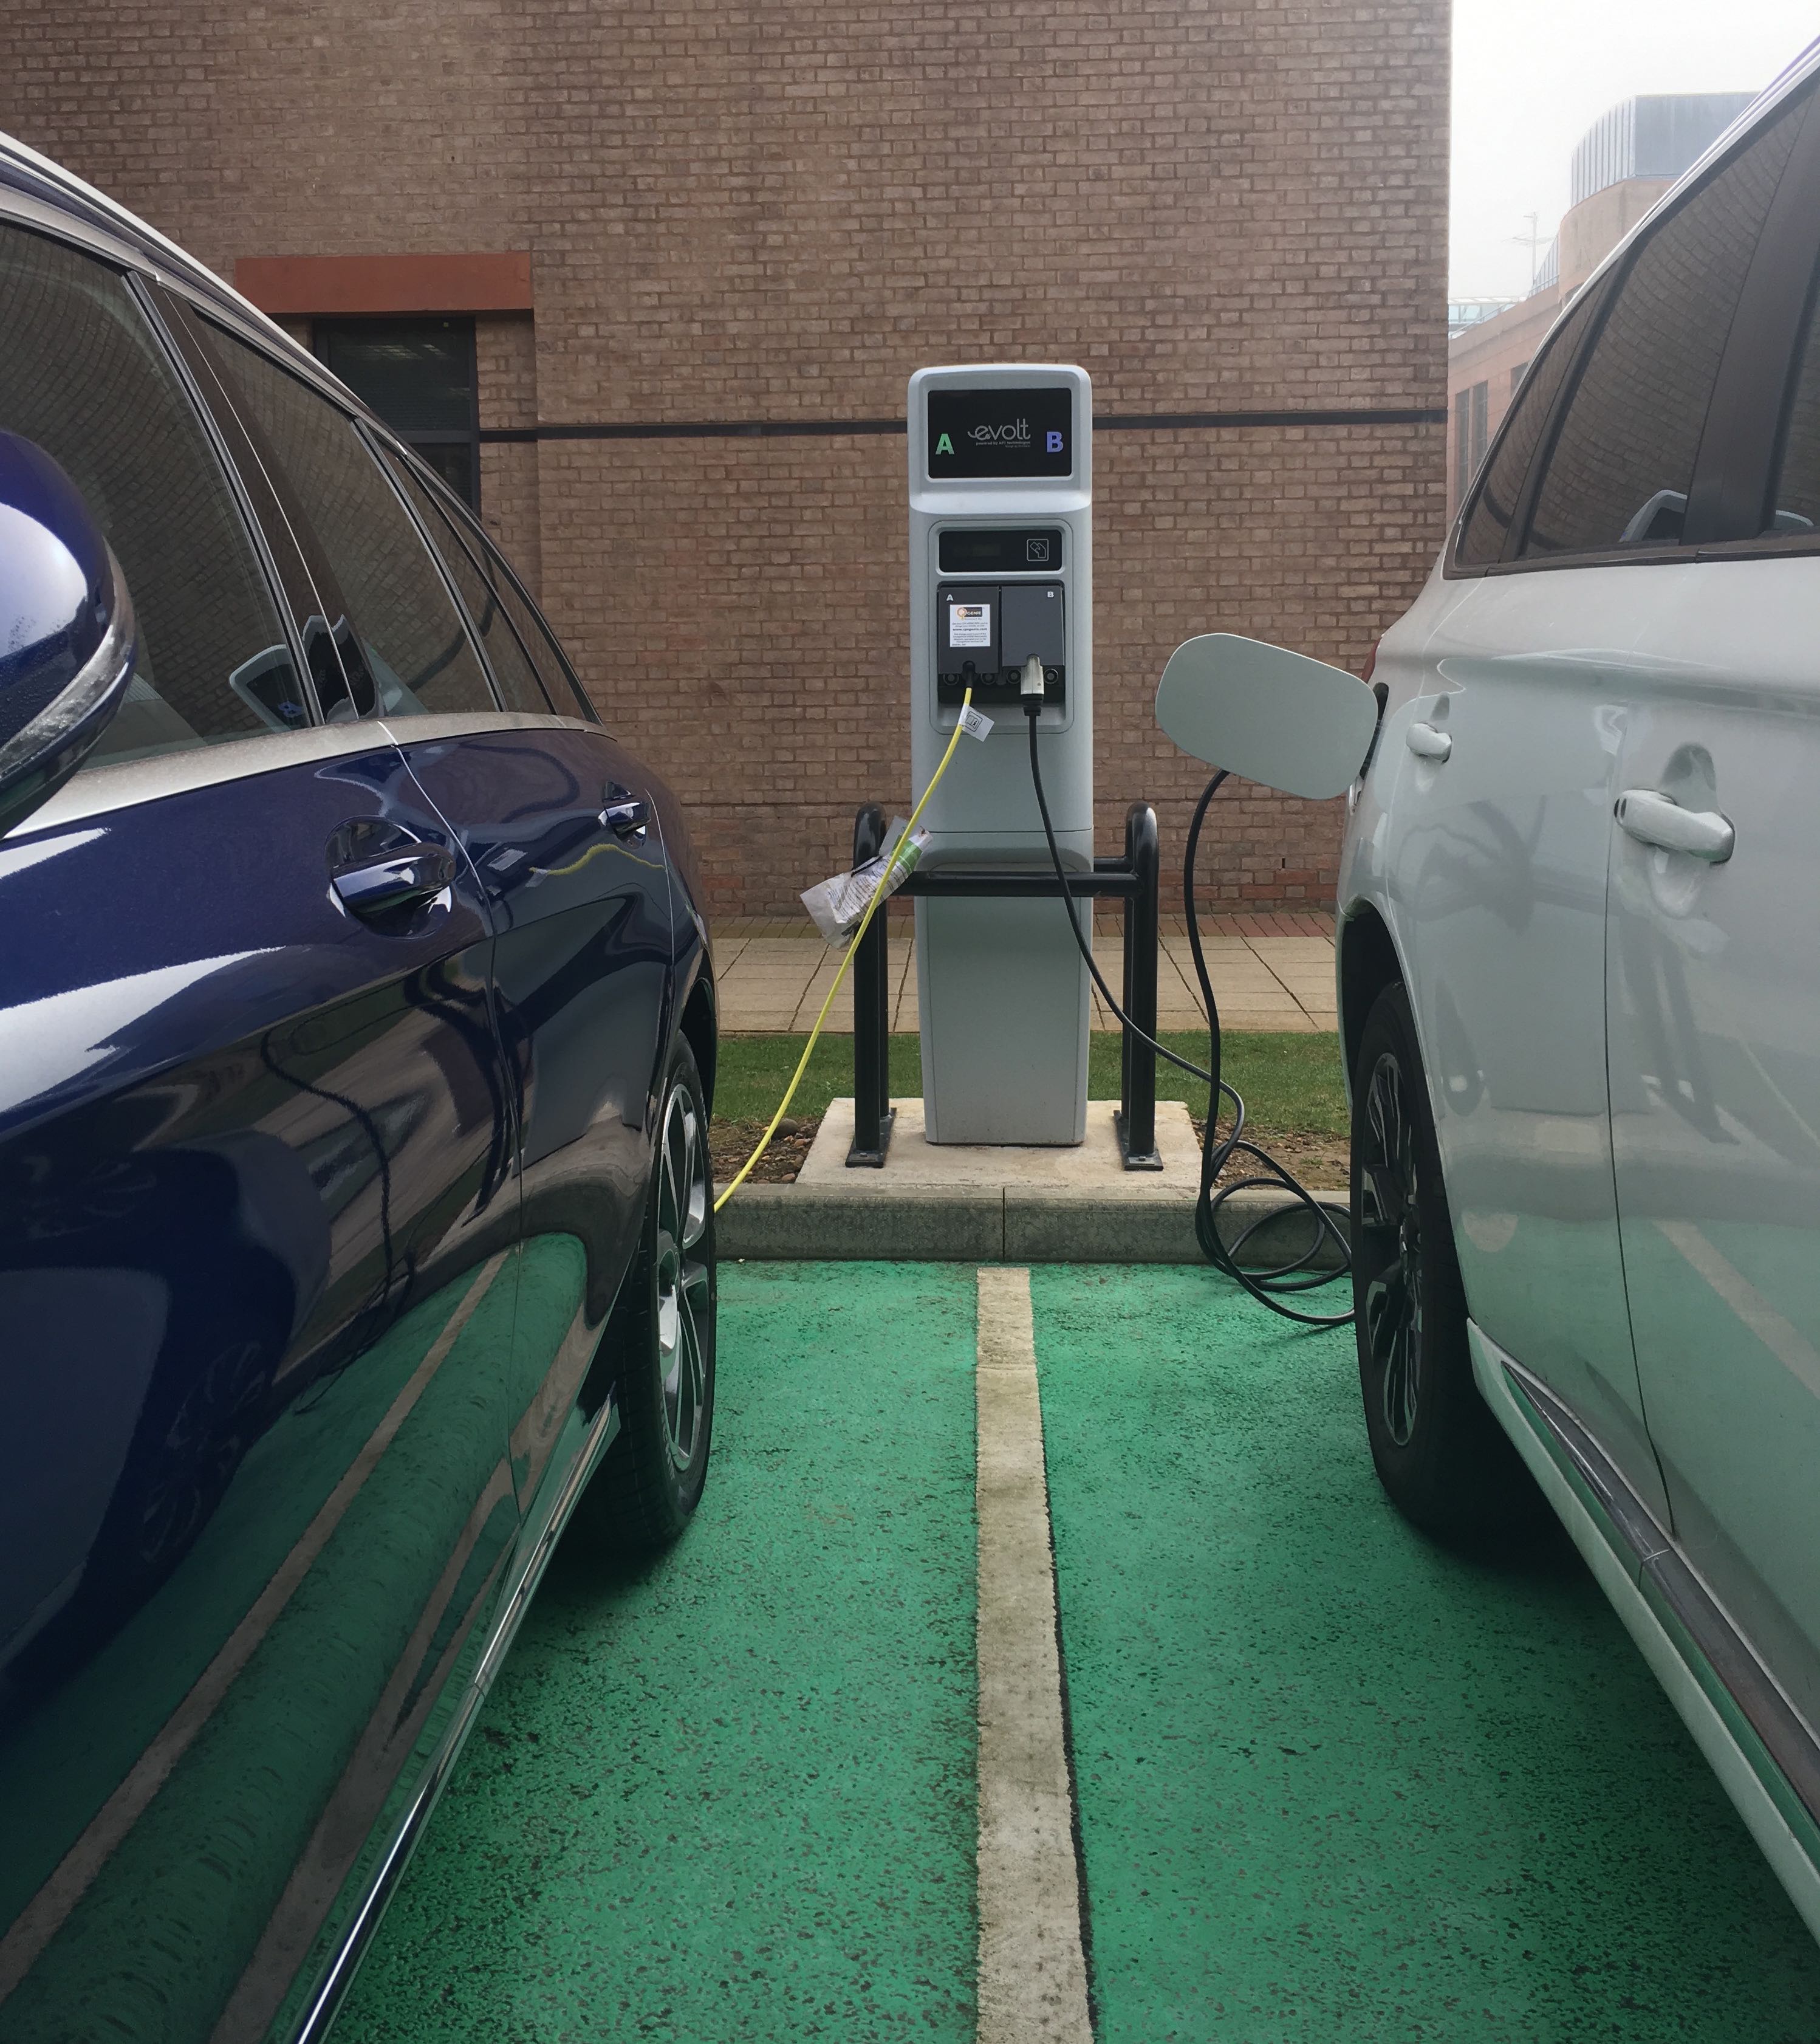 National Grid electric vehicle charge point